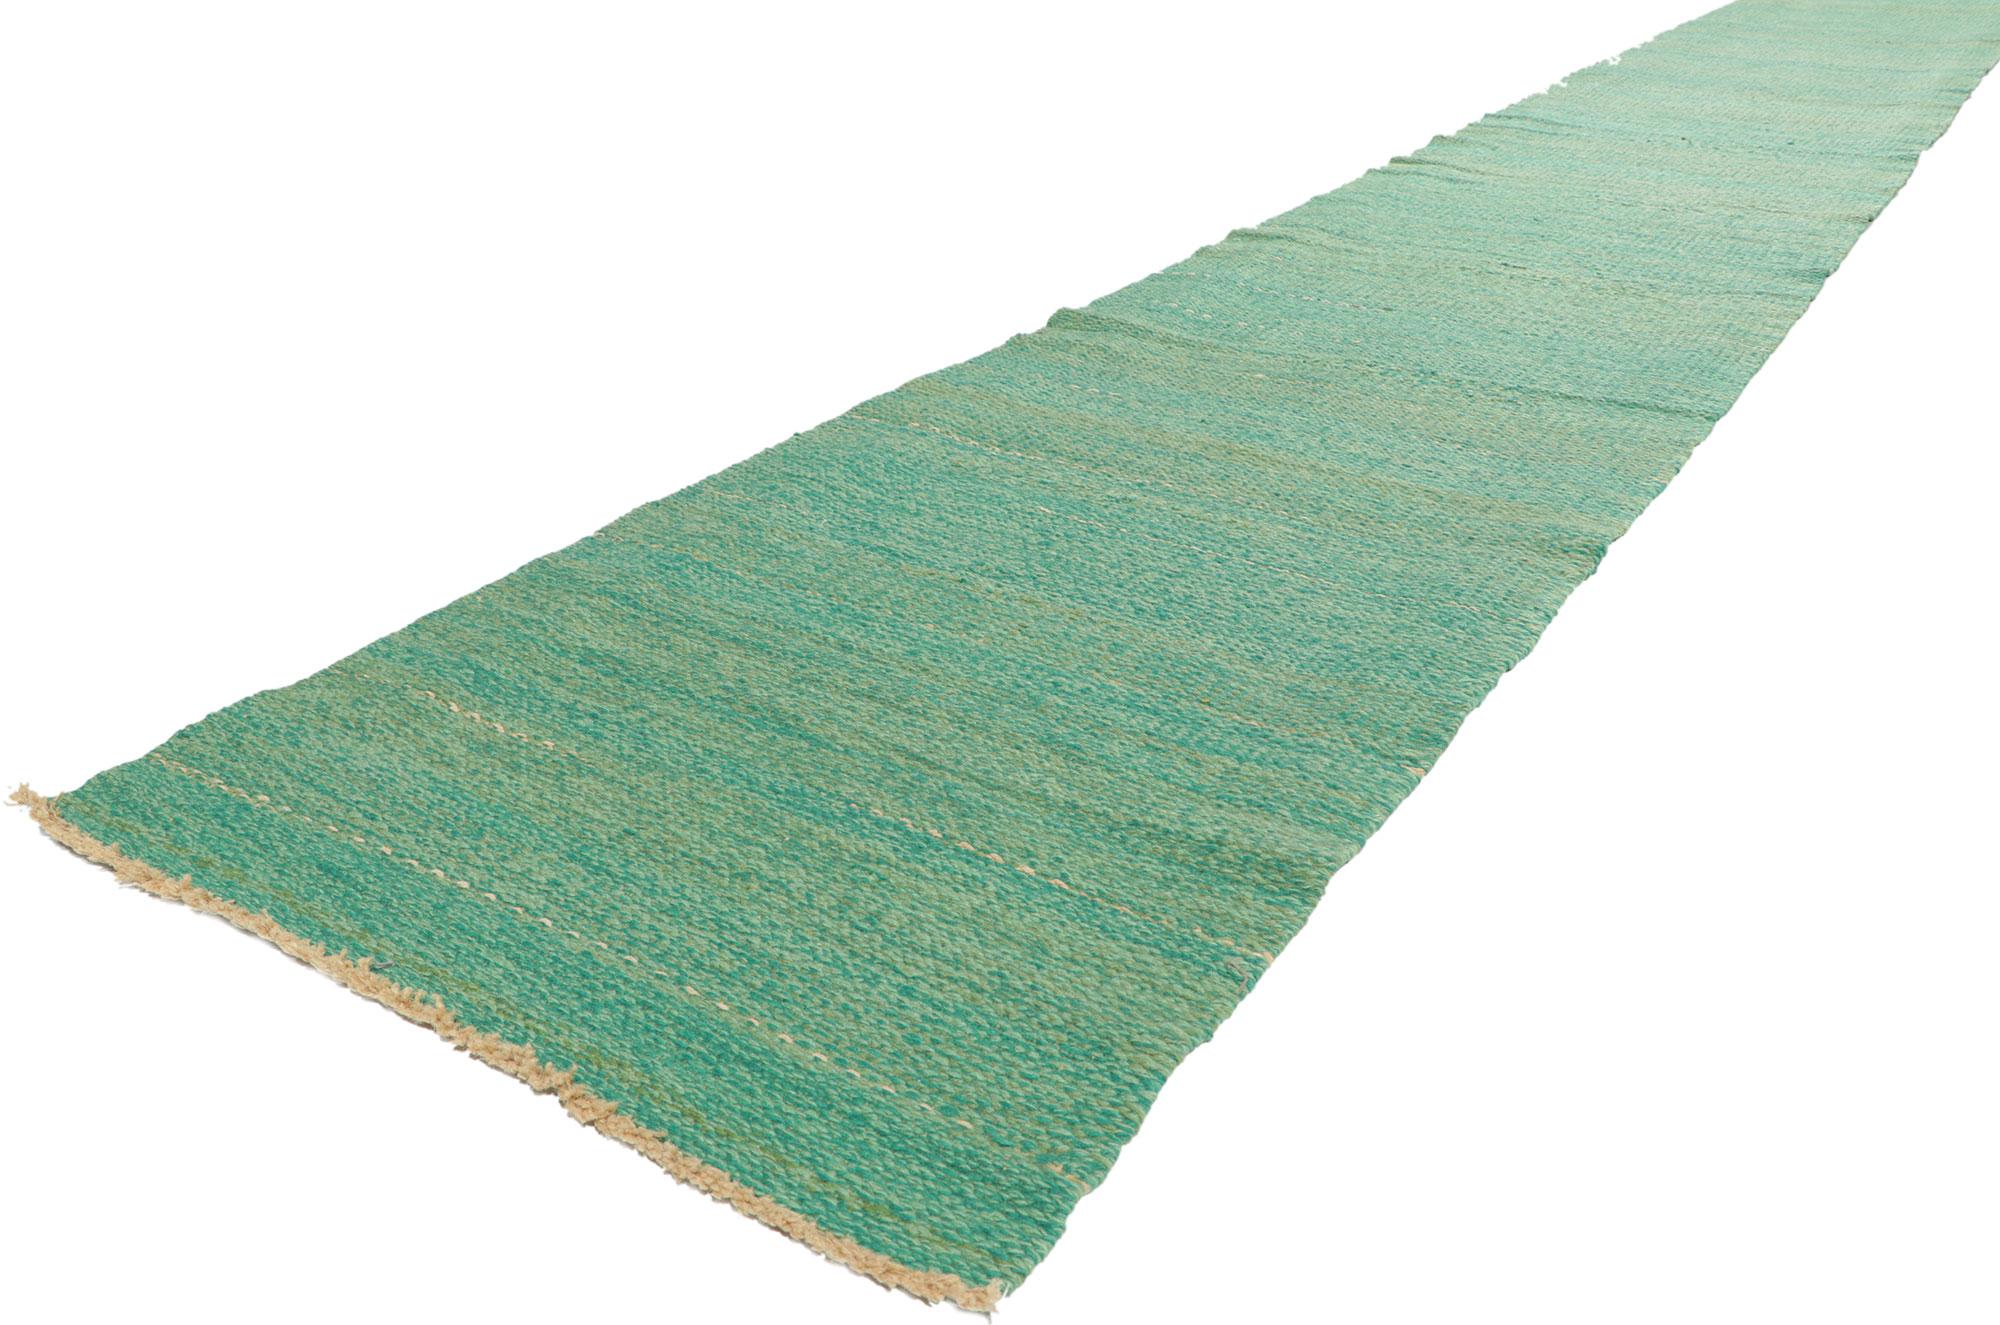 78478 Vintage Swedish Rollakan Runner, 02'04 x 35'08.? Emanating Scandinavian Modern style with incredible detail and texture, this extra-long Swedish rollakan rug runner is a captivating vision of woven beauty. 
Rendered in variegated shades of